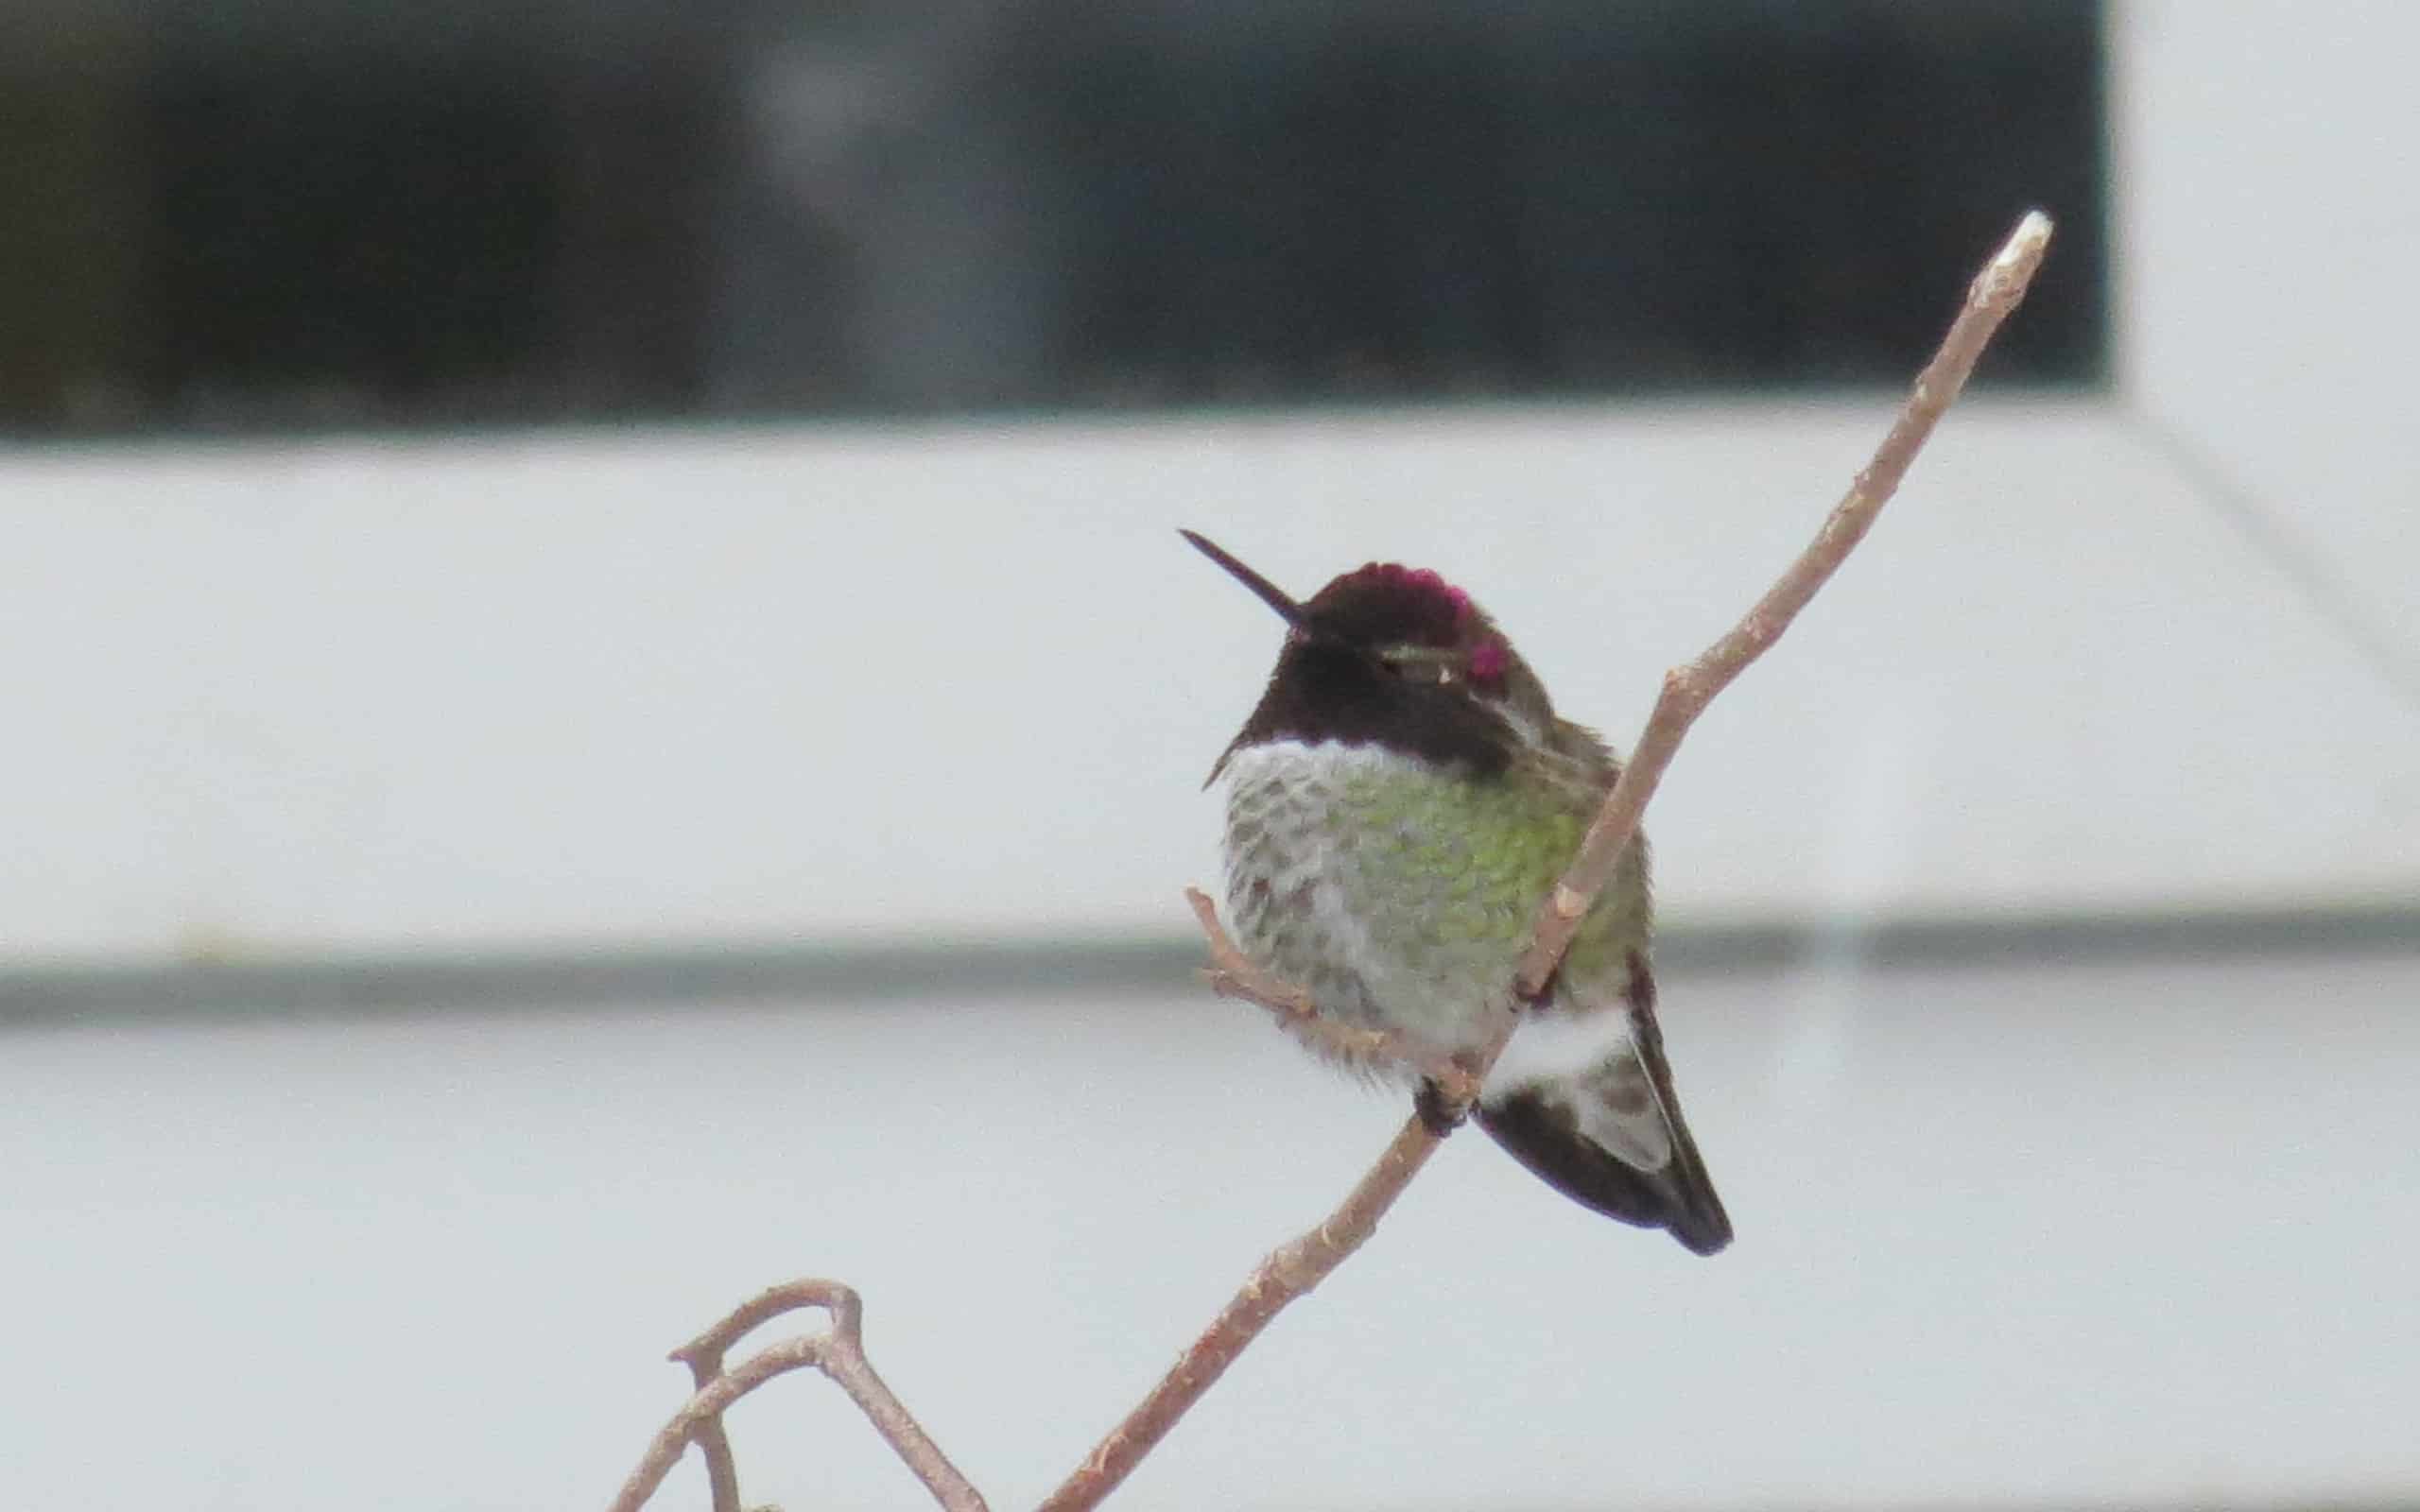 A male Anna's hummingbird on a cold day